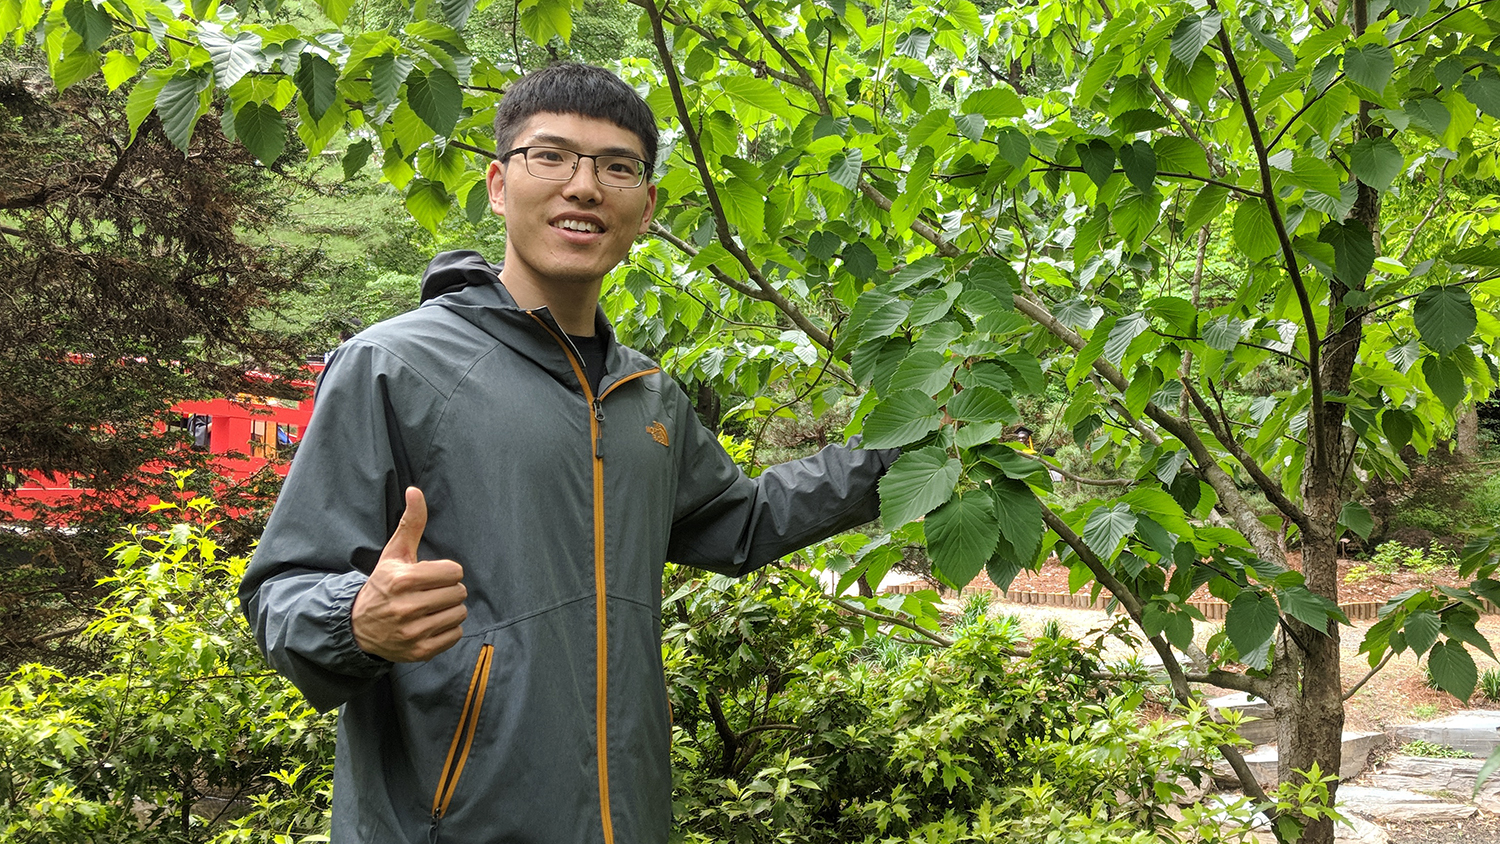 Scientist gives a thumbs-up during a visit to Duke's botanical garden.